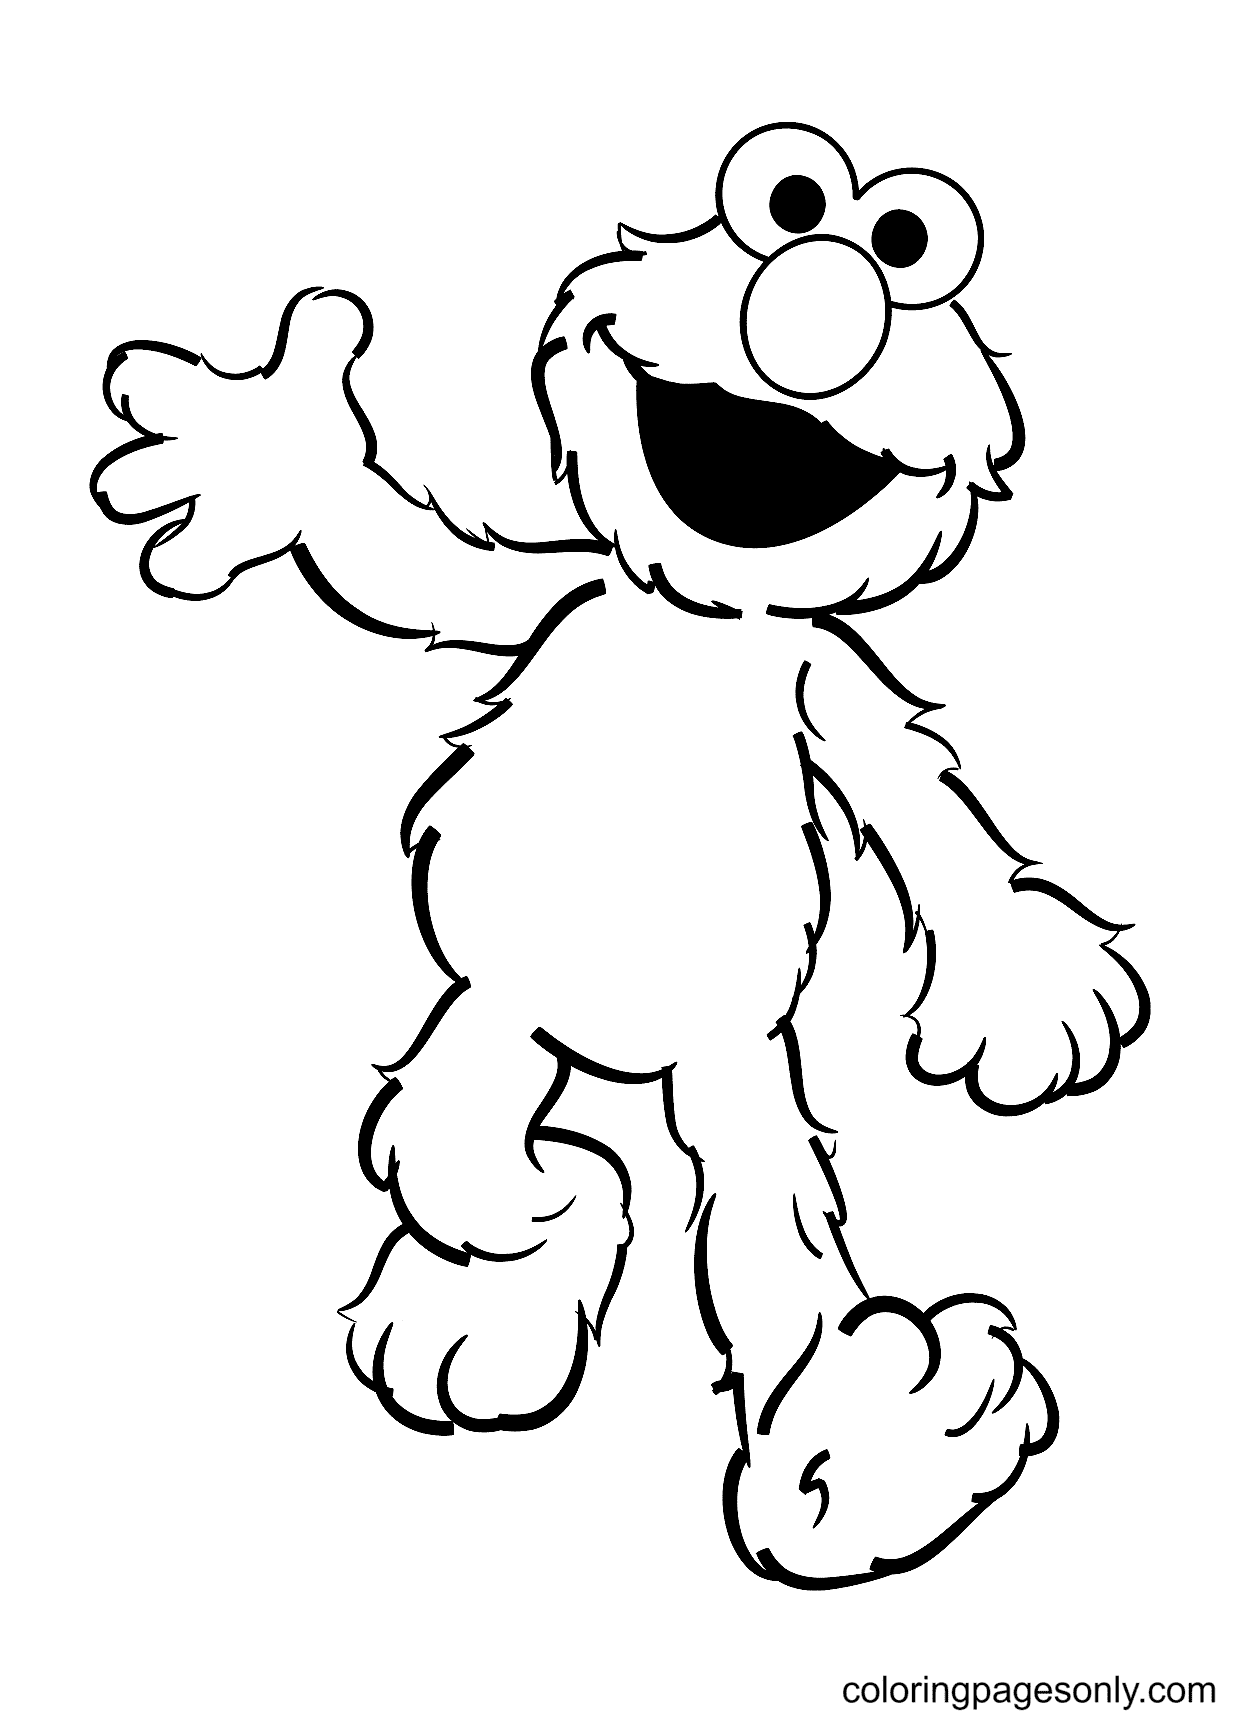 Elmo coloring pages printable for free download